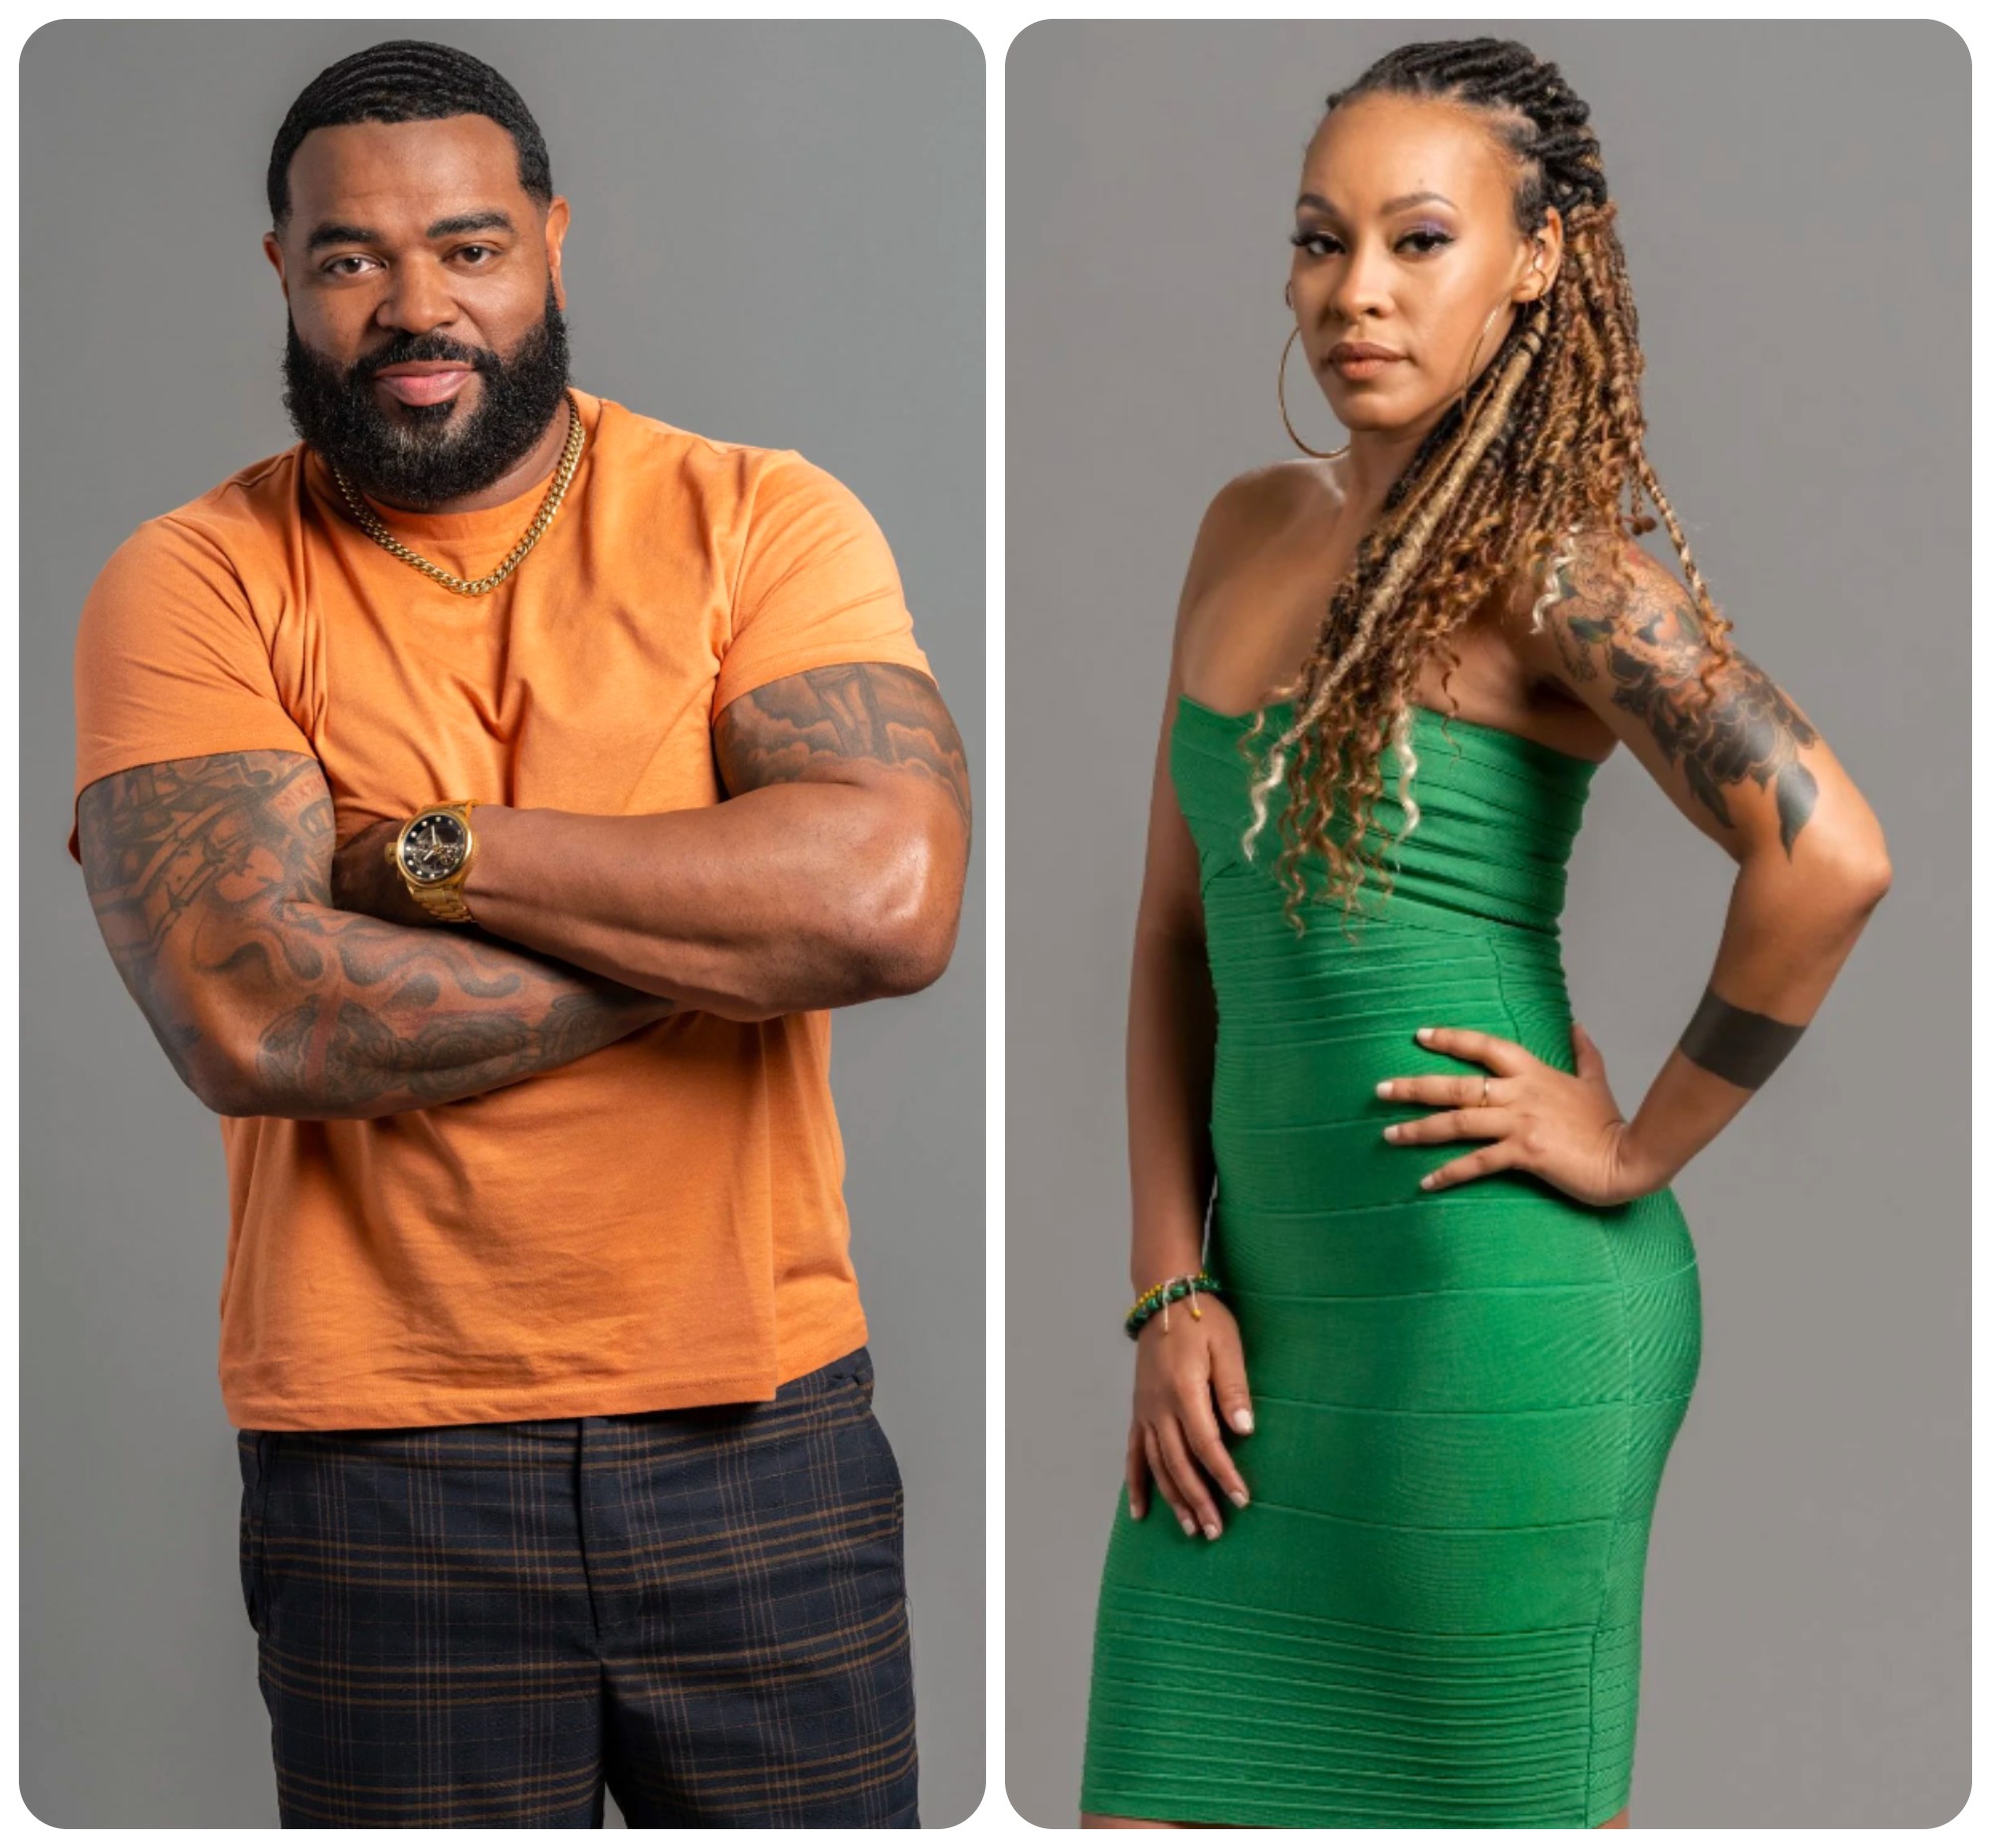 ‘Ready To Love’s’ Clifton & Joi Joining ‘Love & Marriage D.C.’ Amid Monique Samuels’ Departure